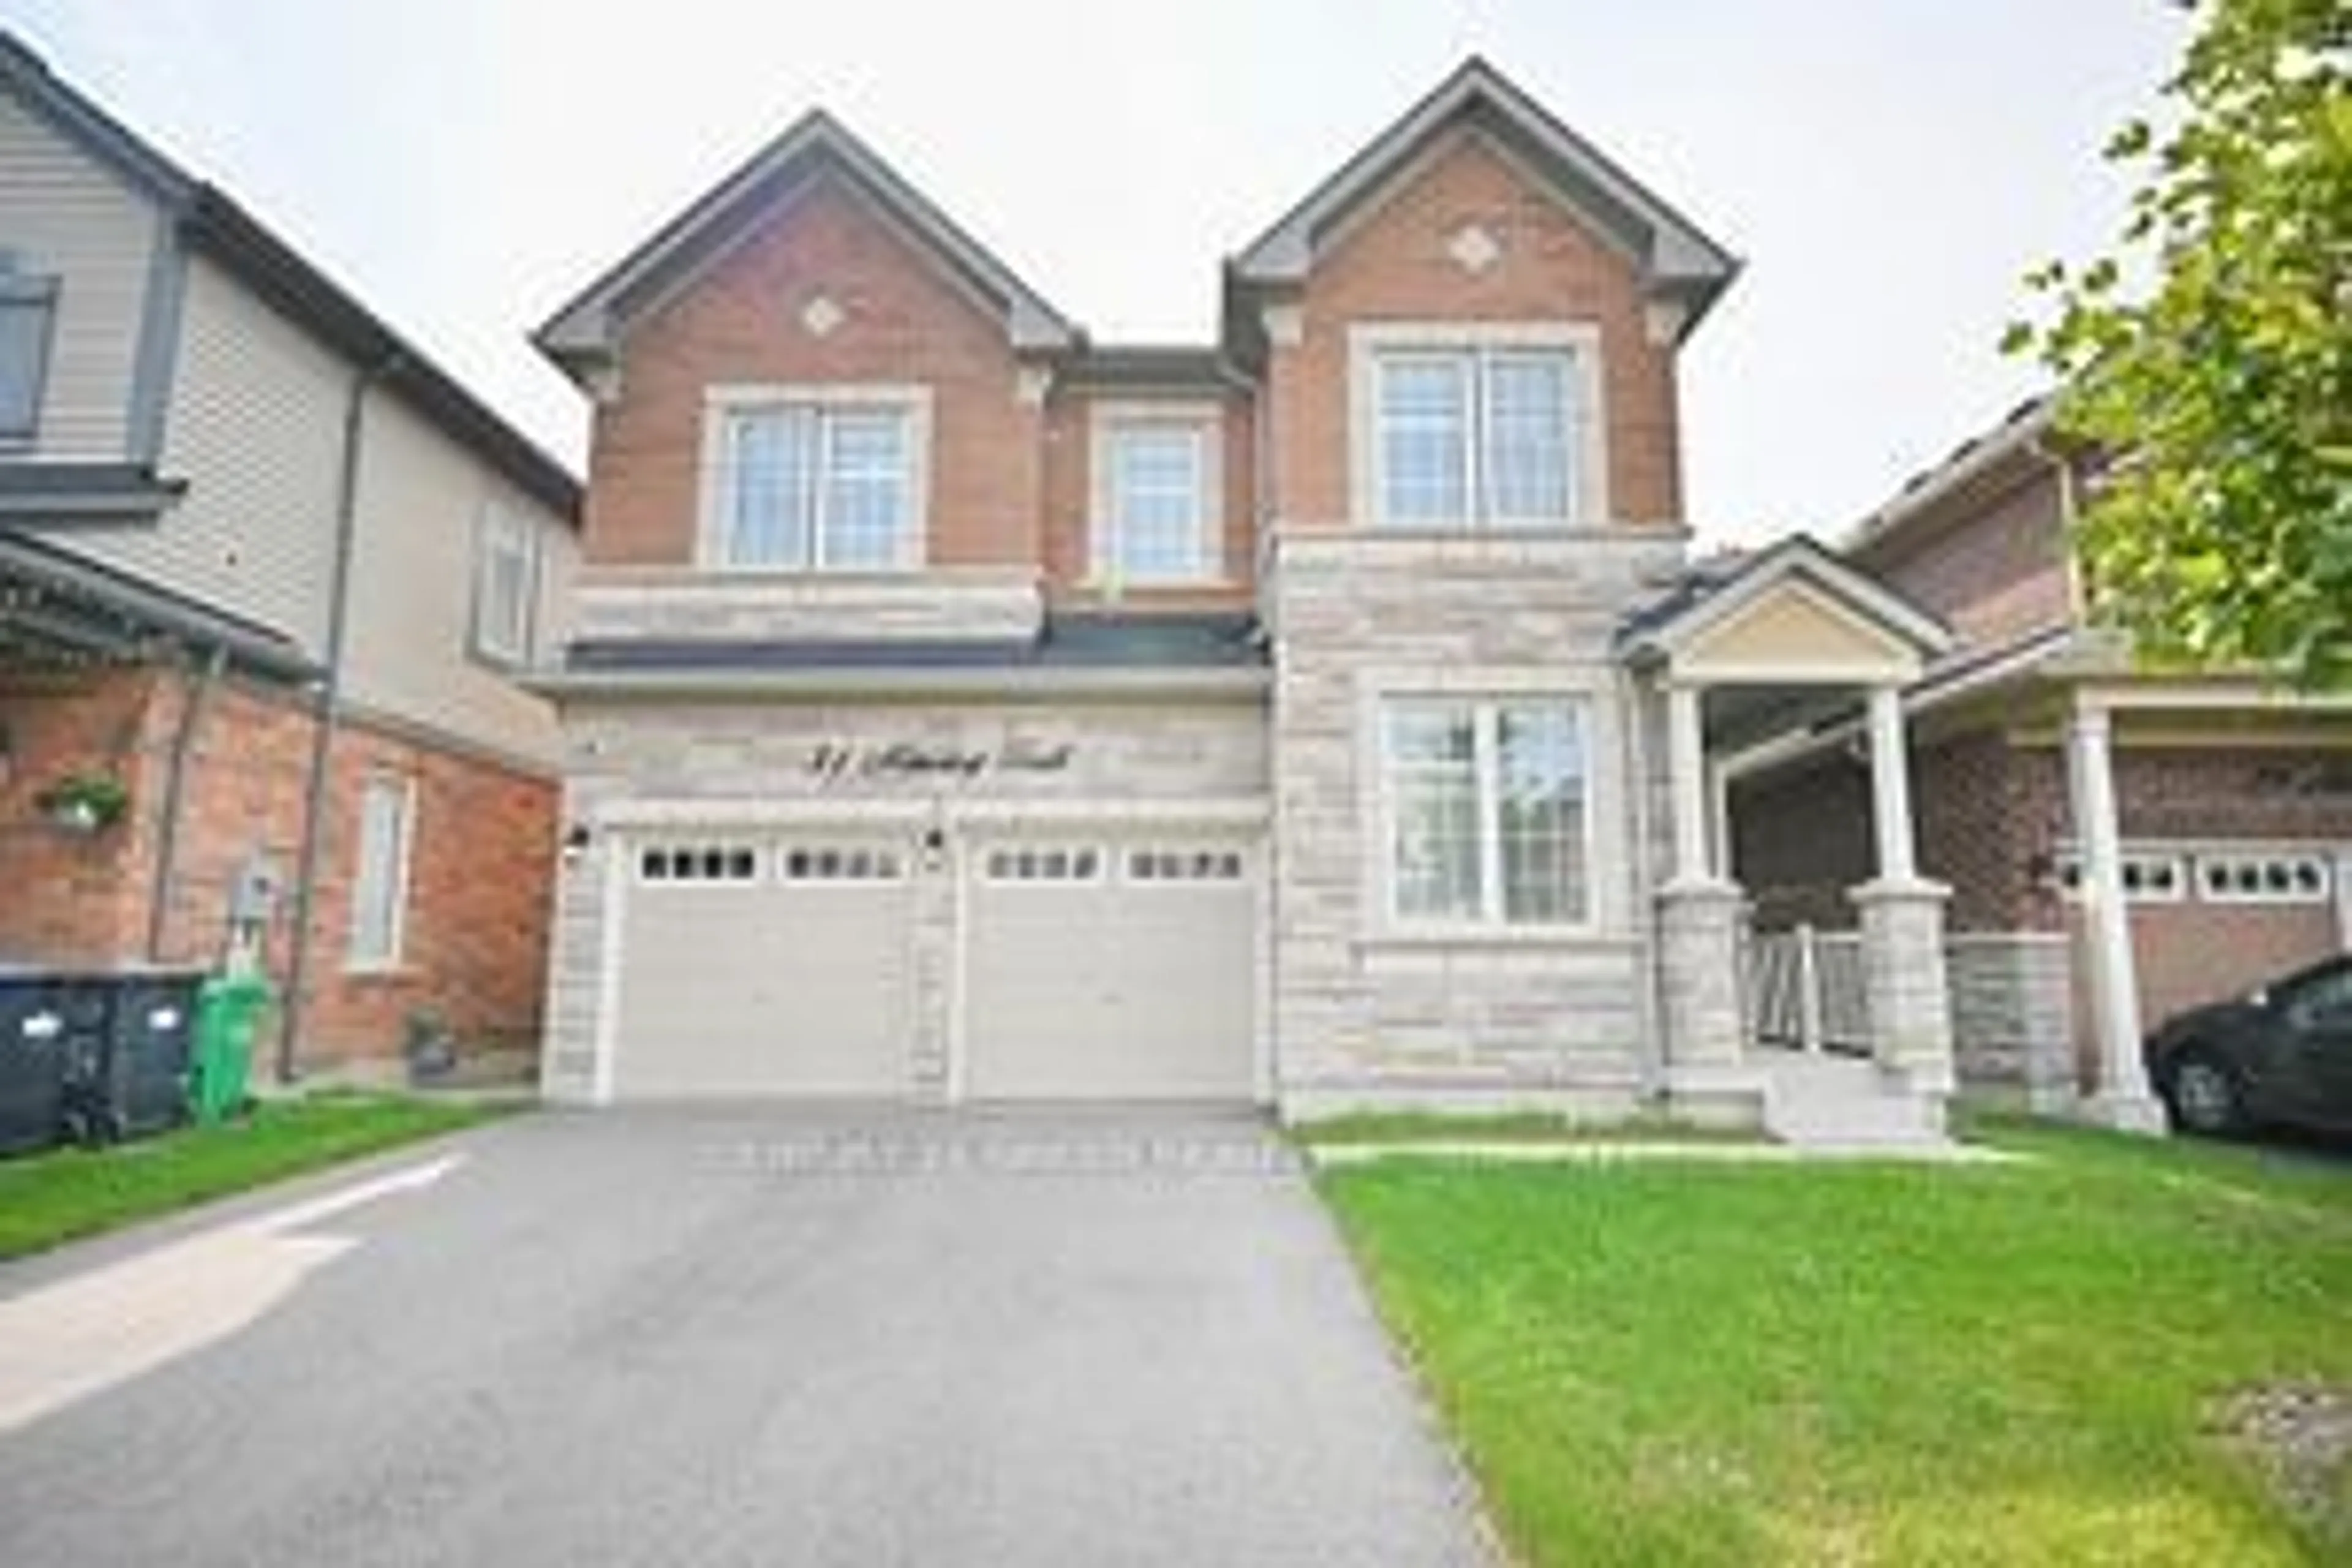 Home with brick exterior material for 31 Mincing Tr, Brampton Ontario L6S 5T4